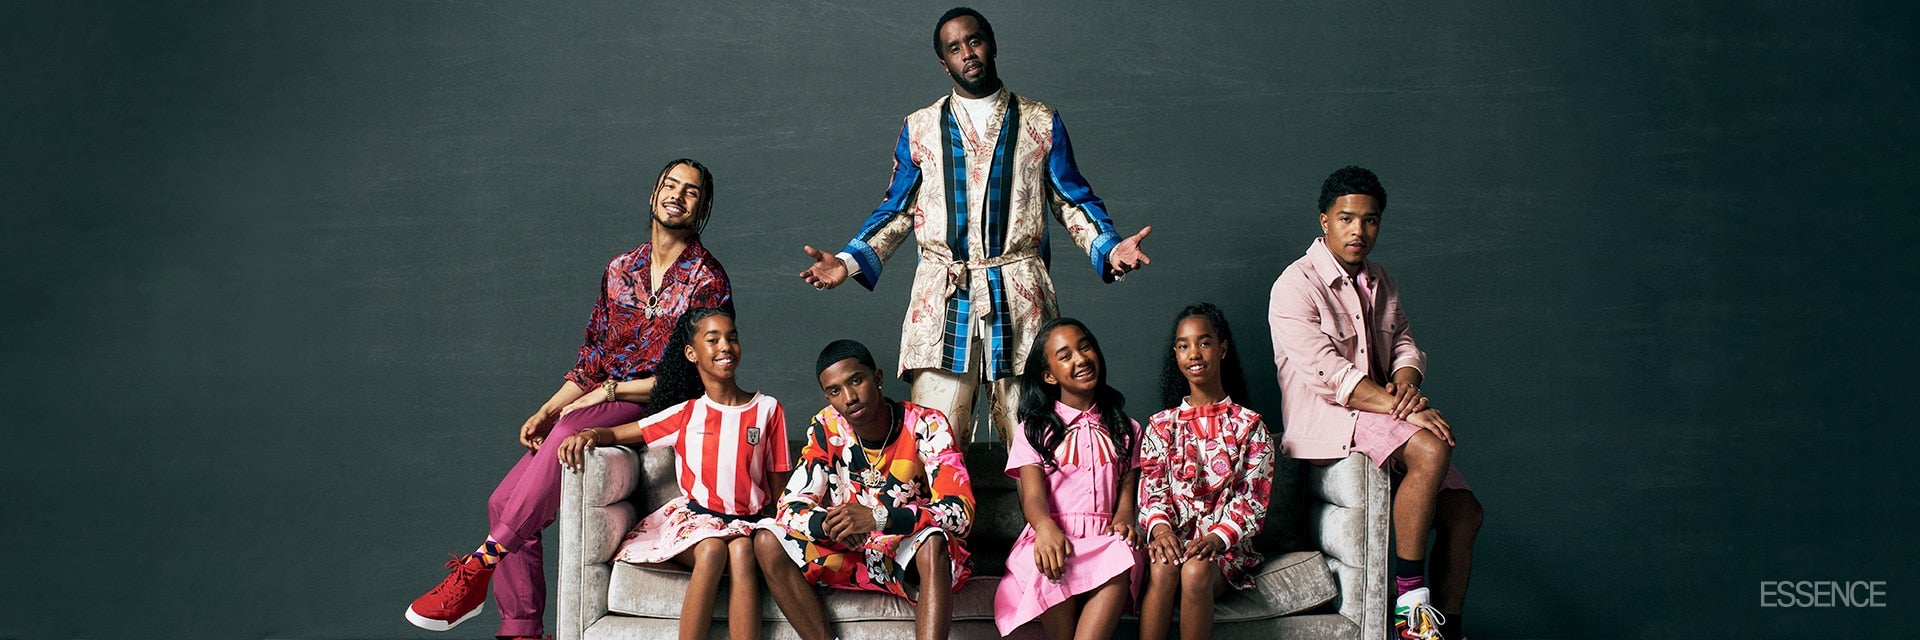 Diddy Is ‘Family Over Everything’ After The Death of Kim Porter